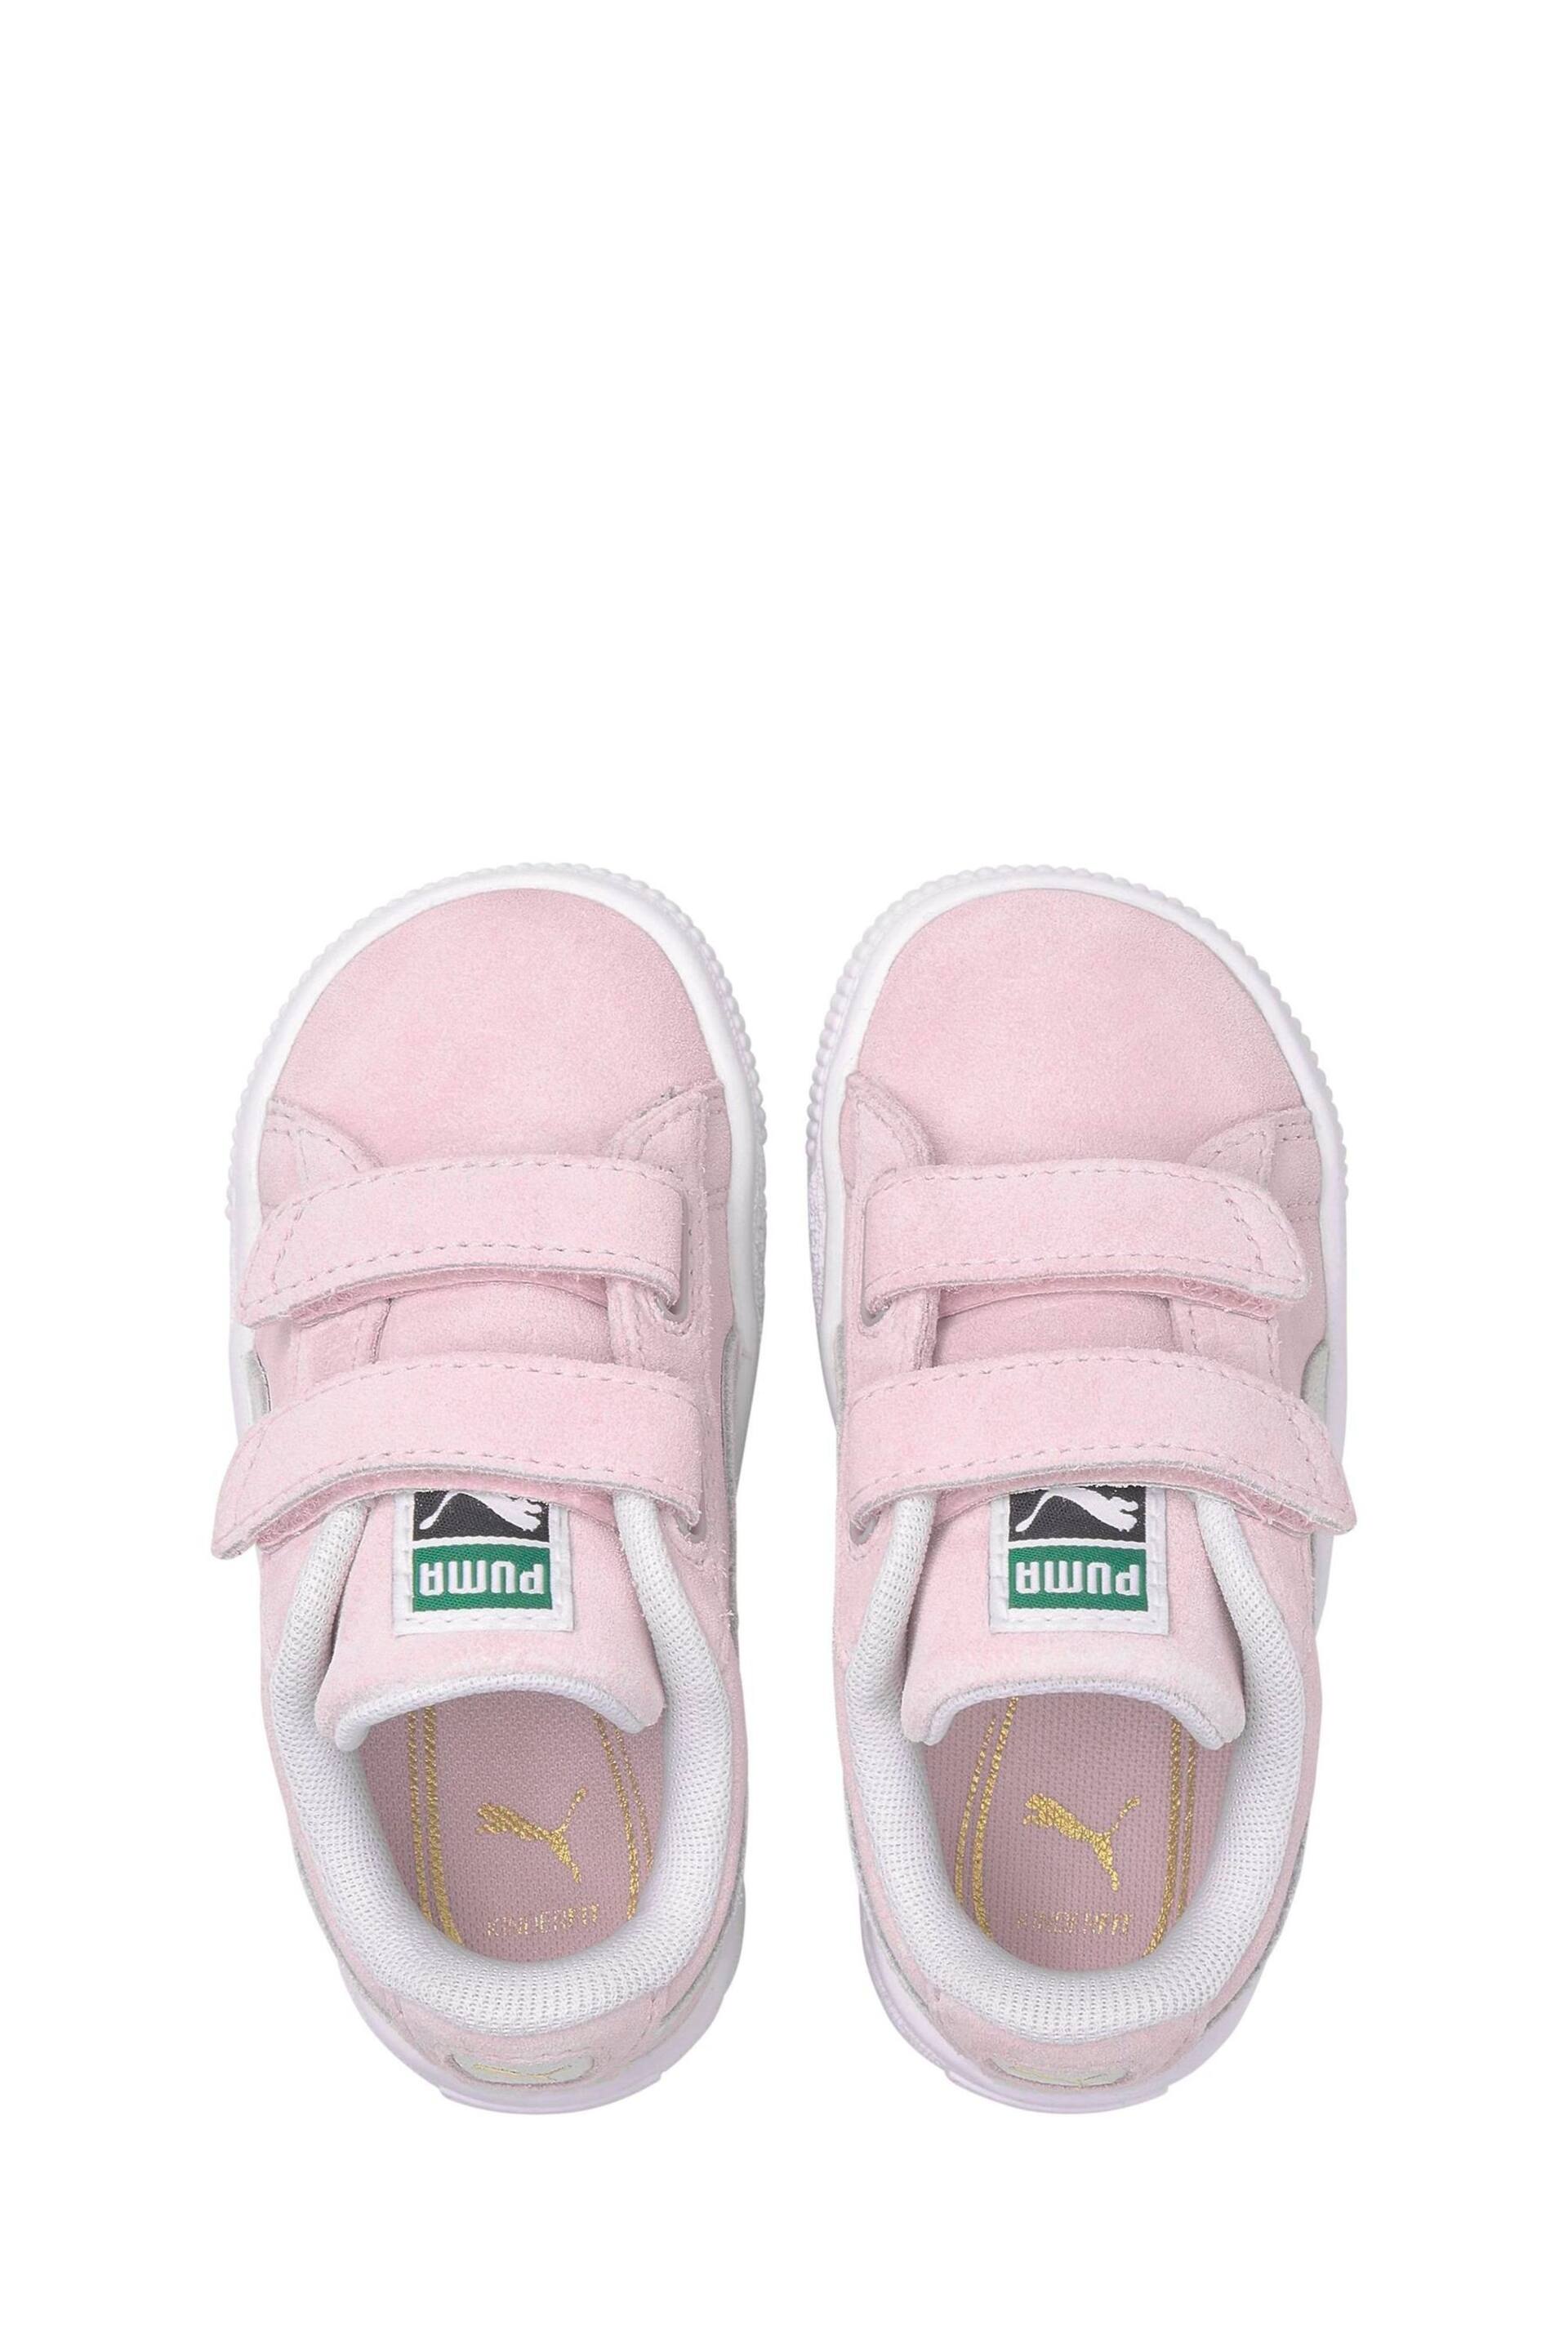 Puma Pink Babies Suede Classic XXI Trainers - Image 4 of 5